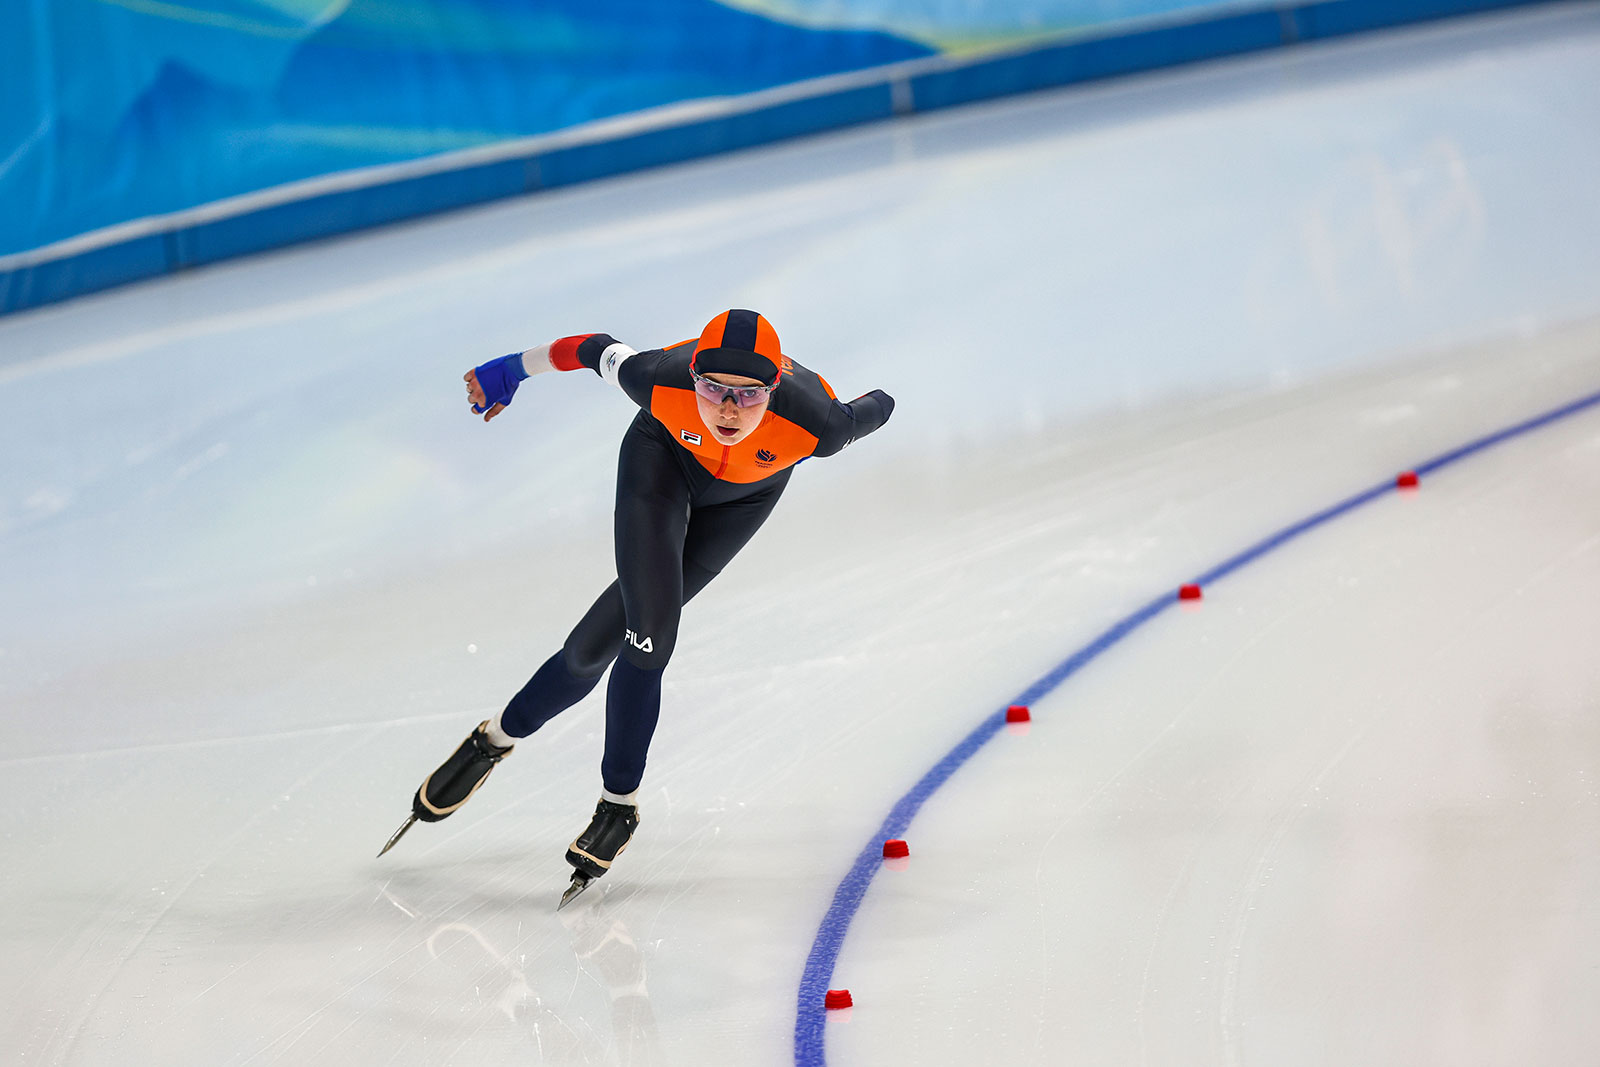 Dutch speed skater Irene Schouten competes in the 5,000m event on February 10.